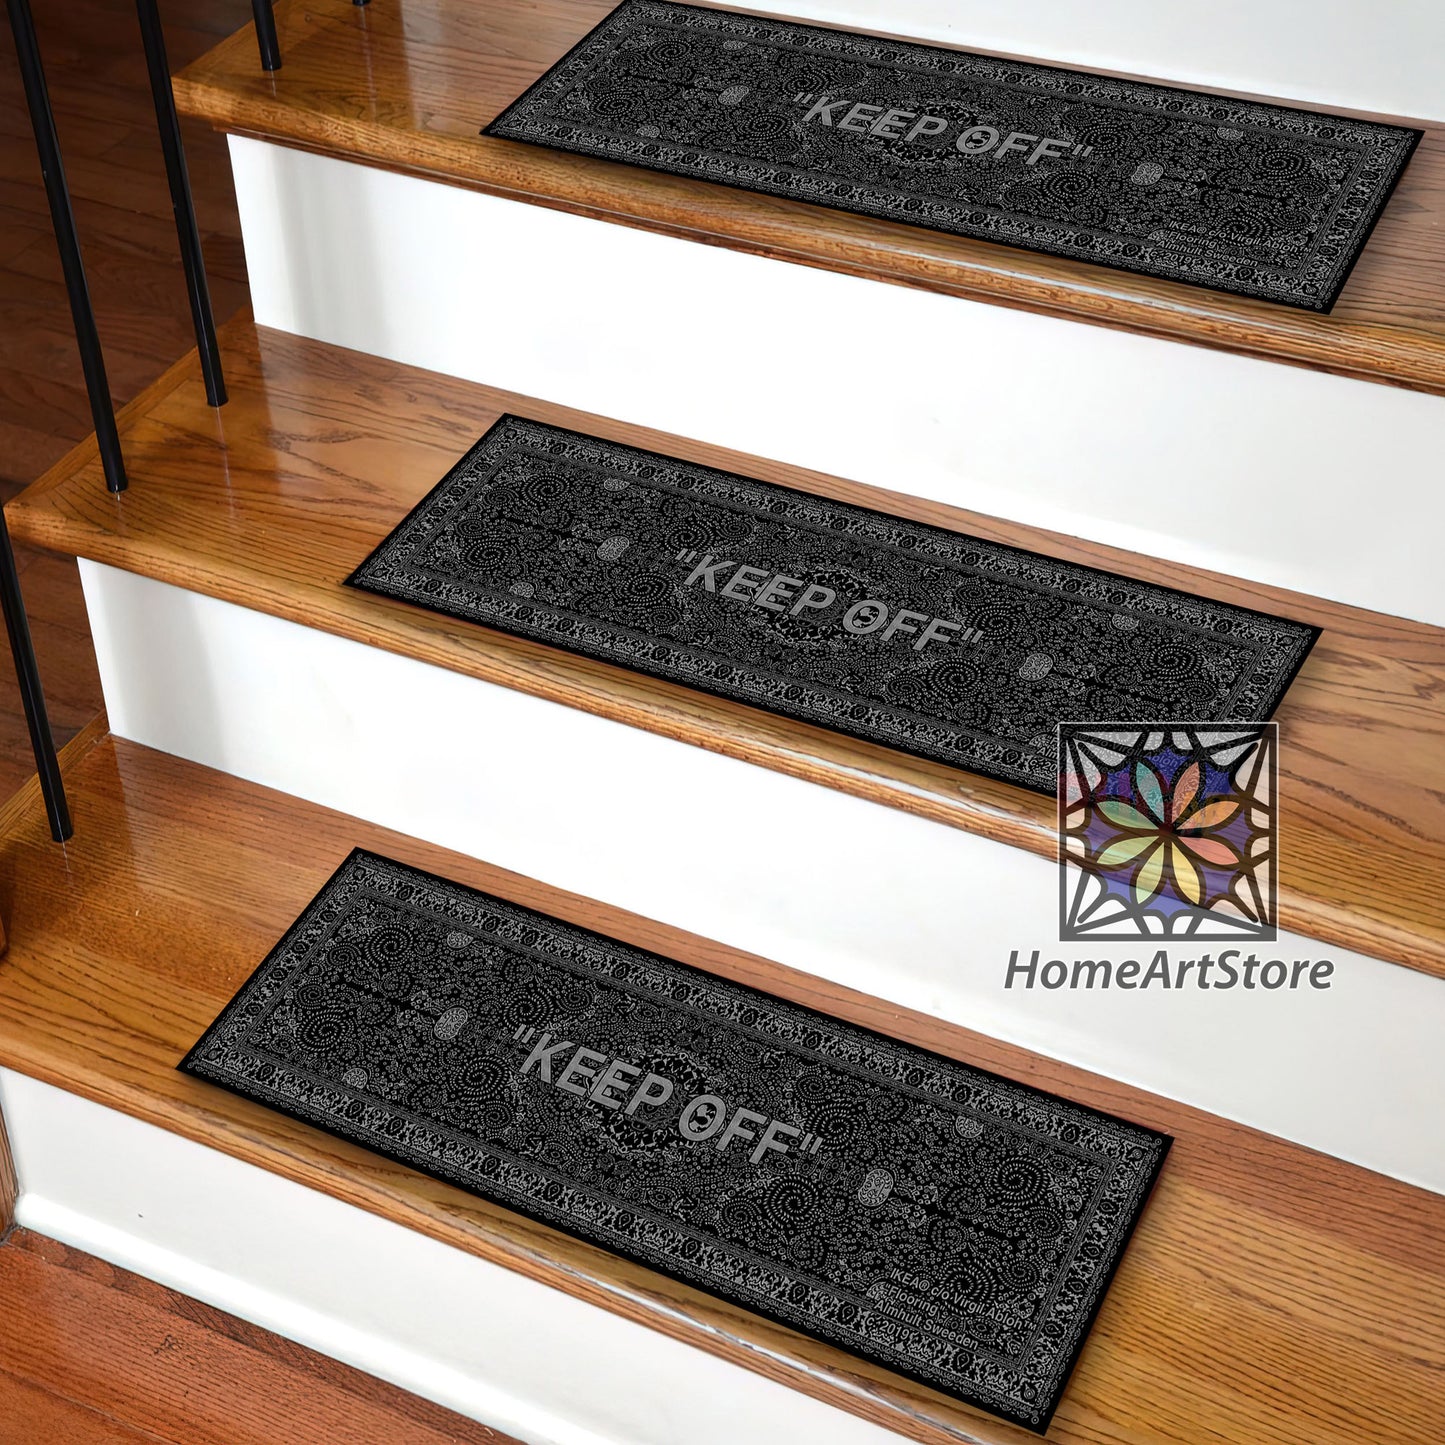 Keepoff Themed Stair Rugs, Black and Silver Keep Off Stair Step Rugs, Hypebeast Decor, Street Fashion, Sneaker Stair Rugs